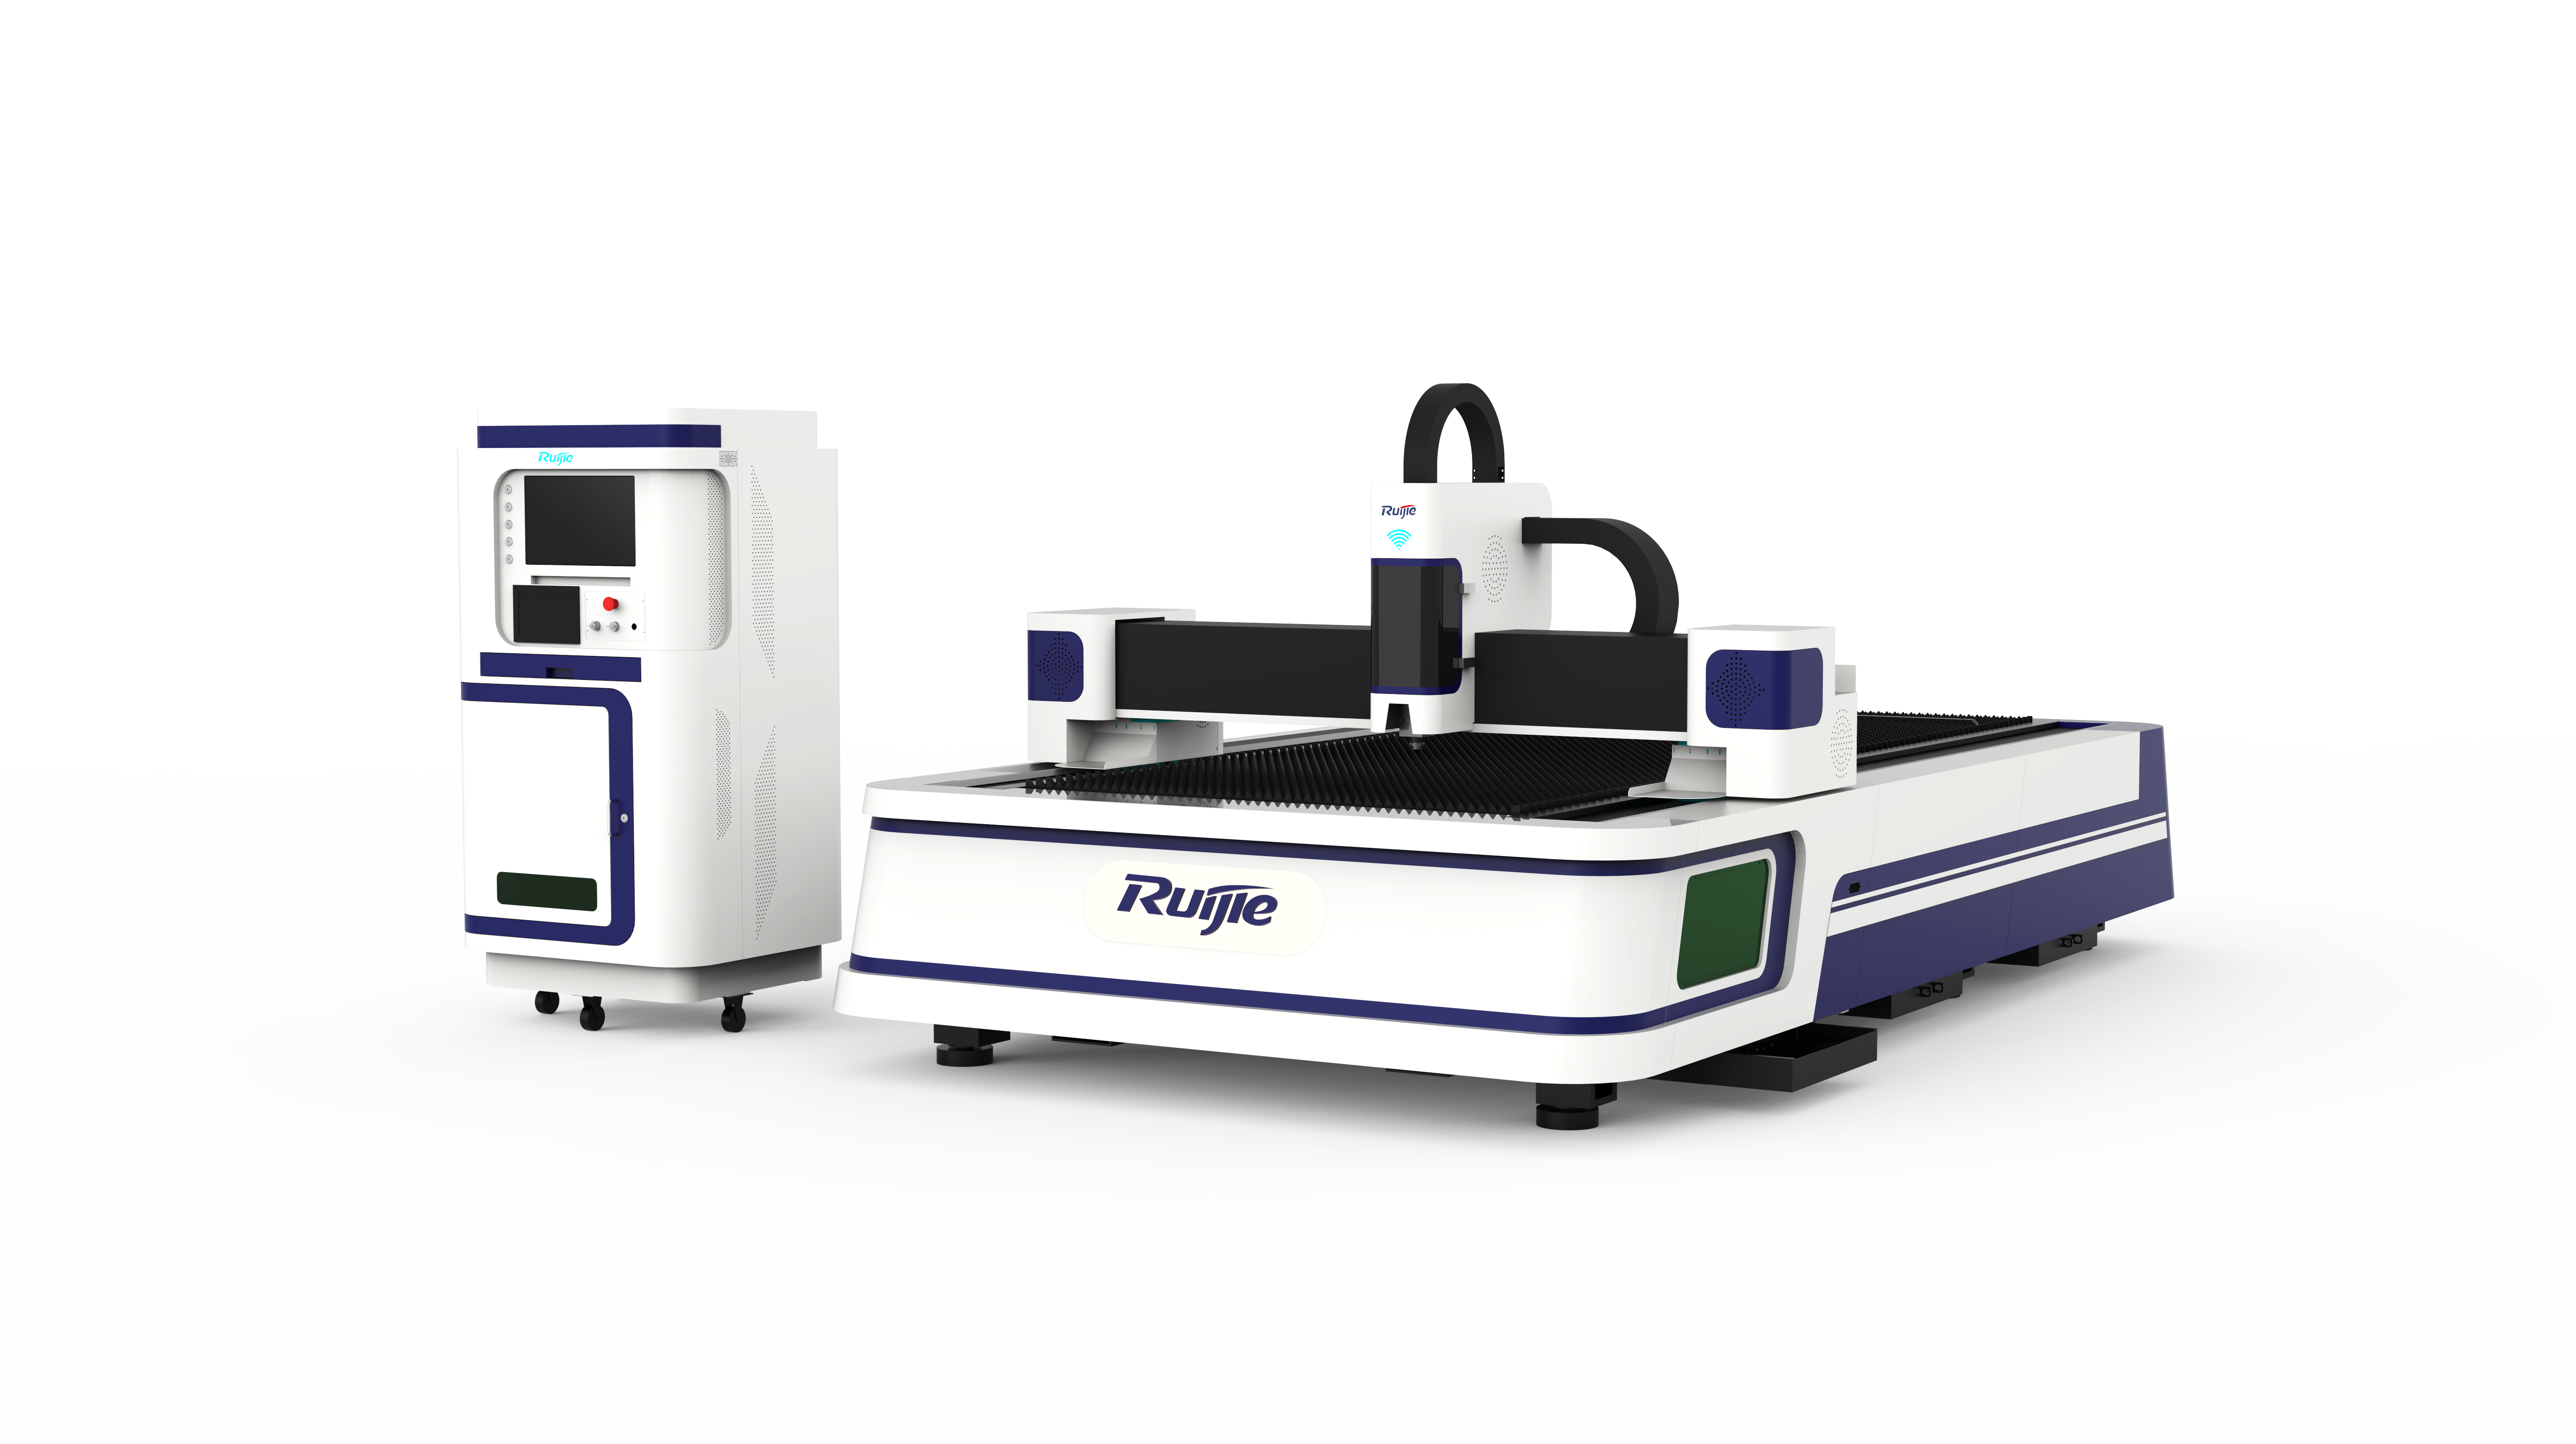 Fueling the initiative of intelligently Made in China, Ruijie Laser takes stride towards high-end manufacture——Hugh